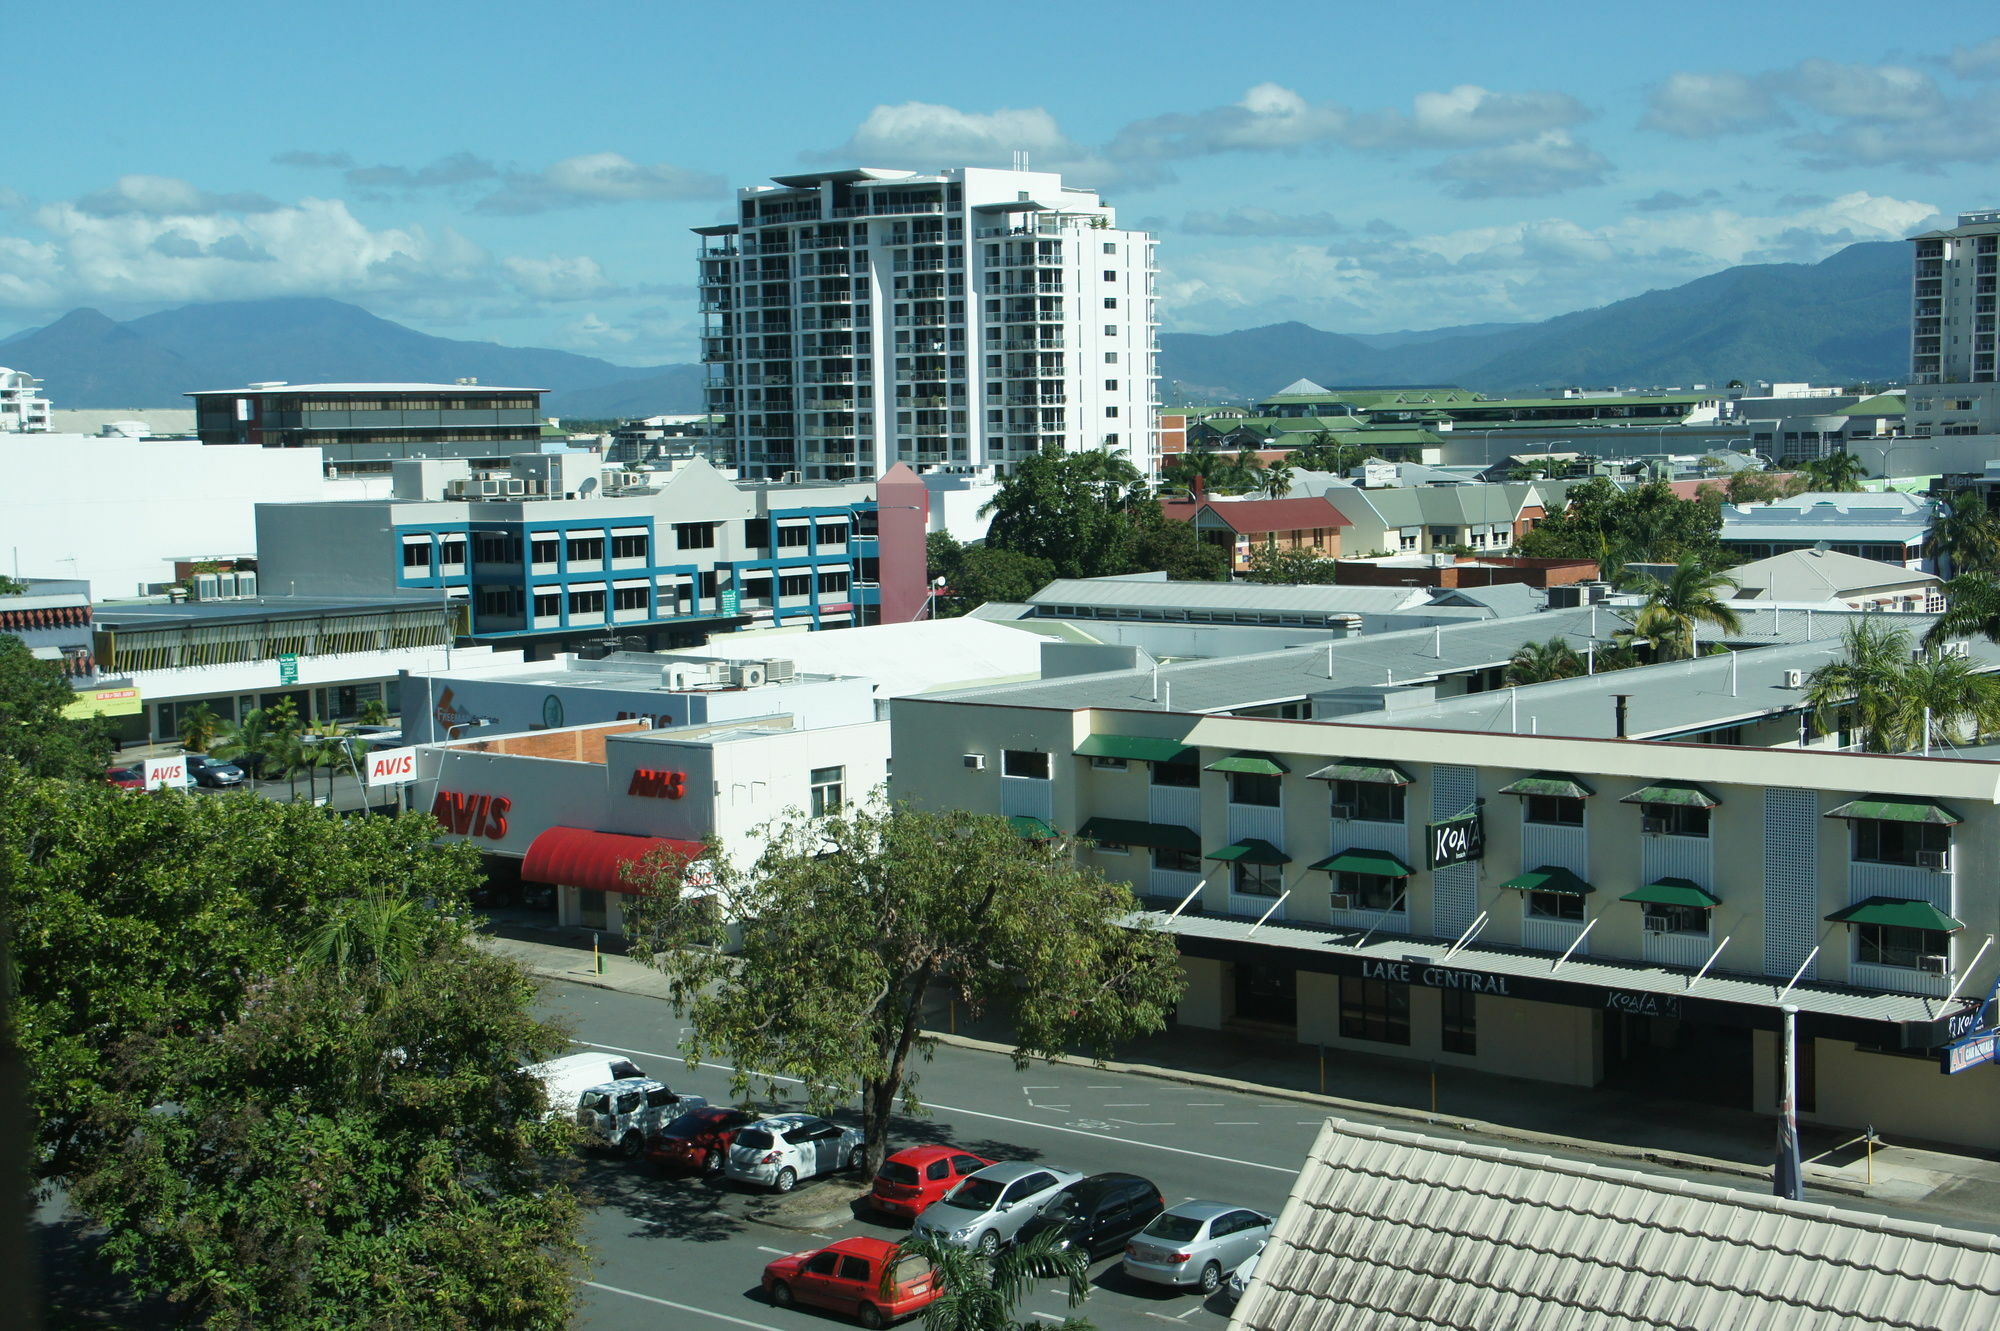 Lake Central Cairns Exterior photo